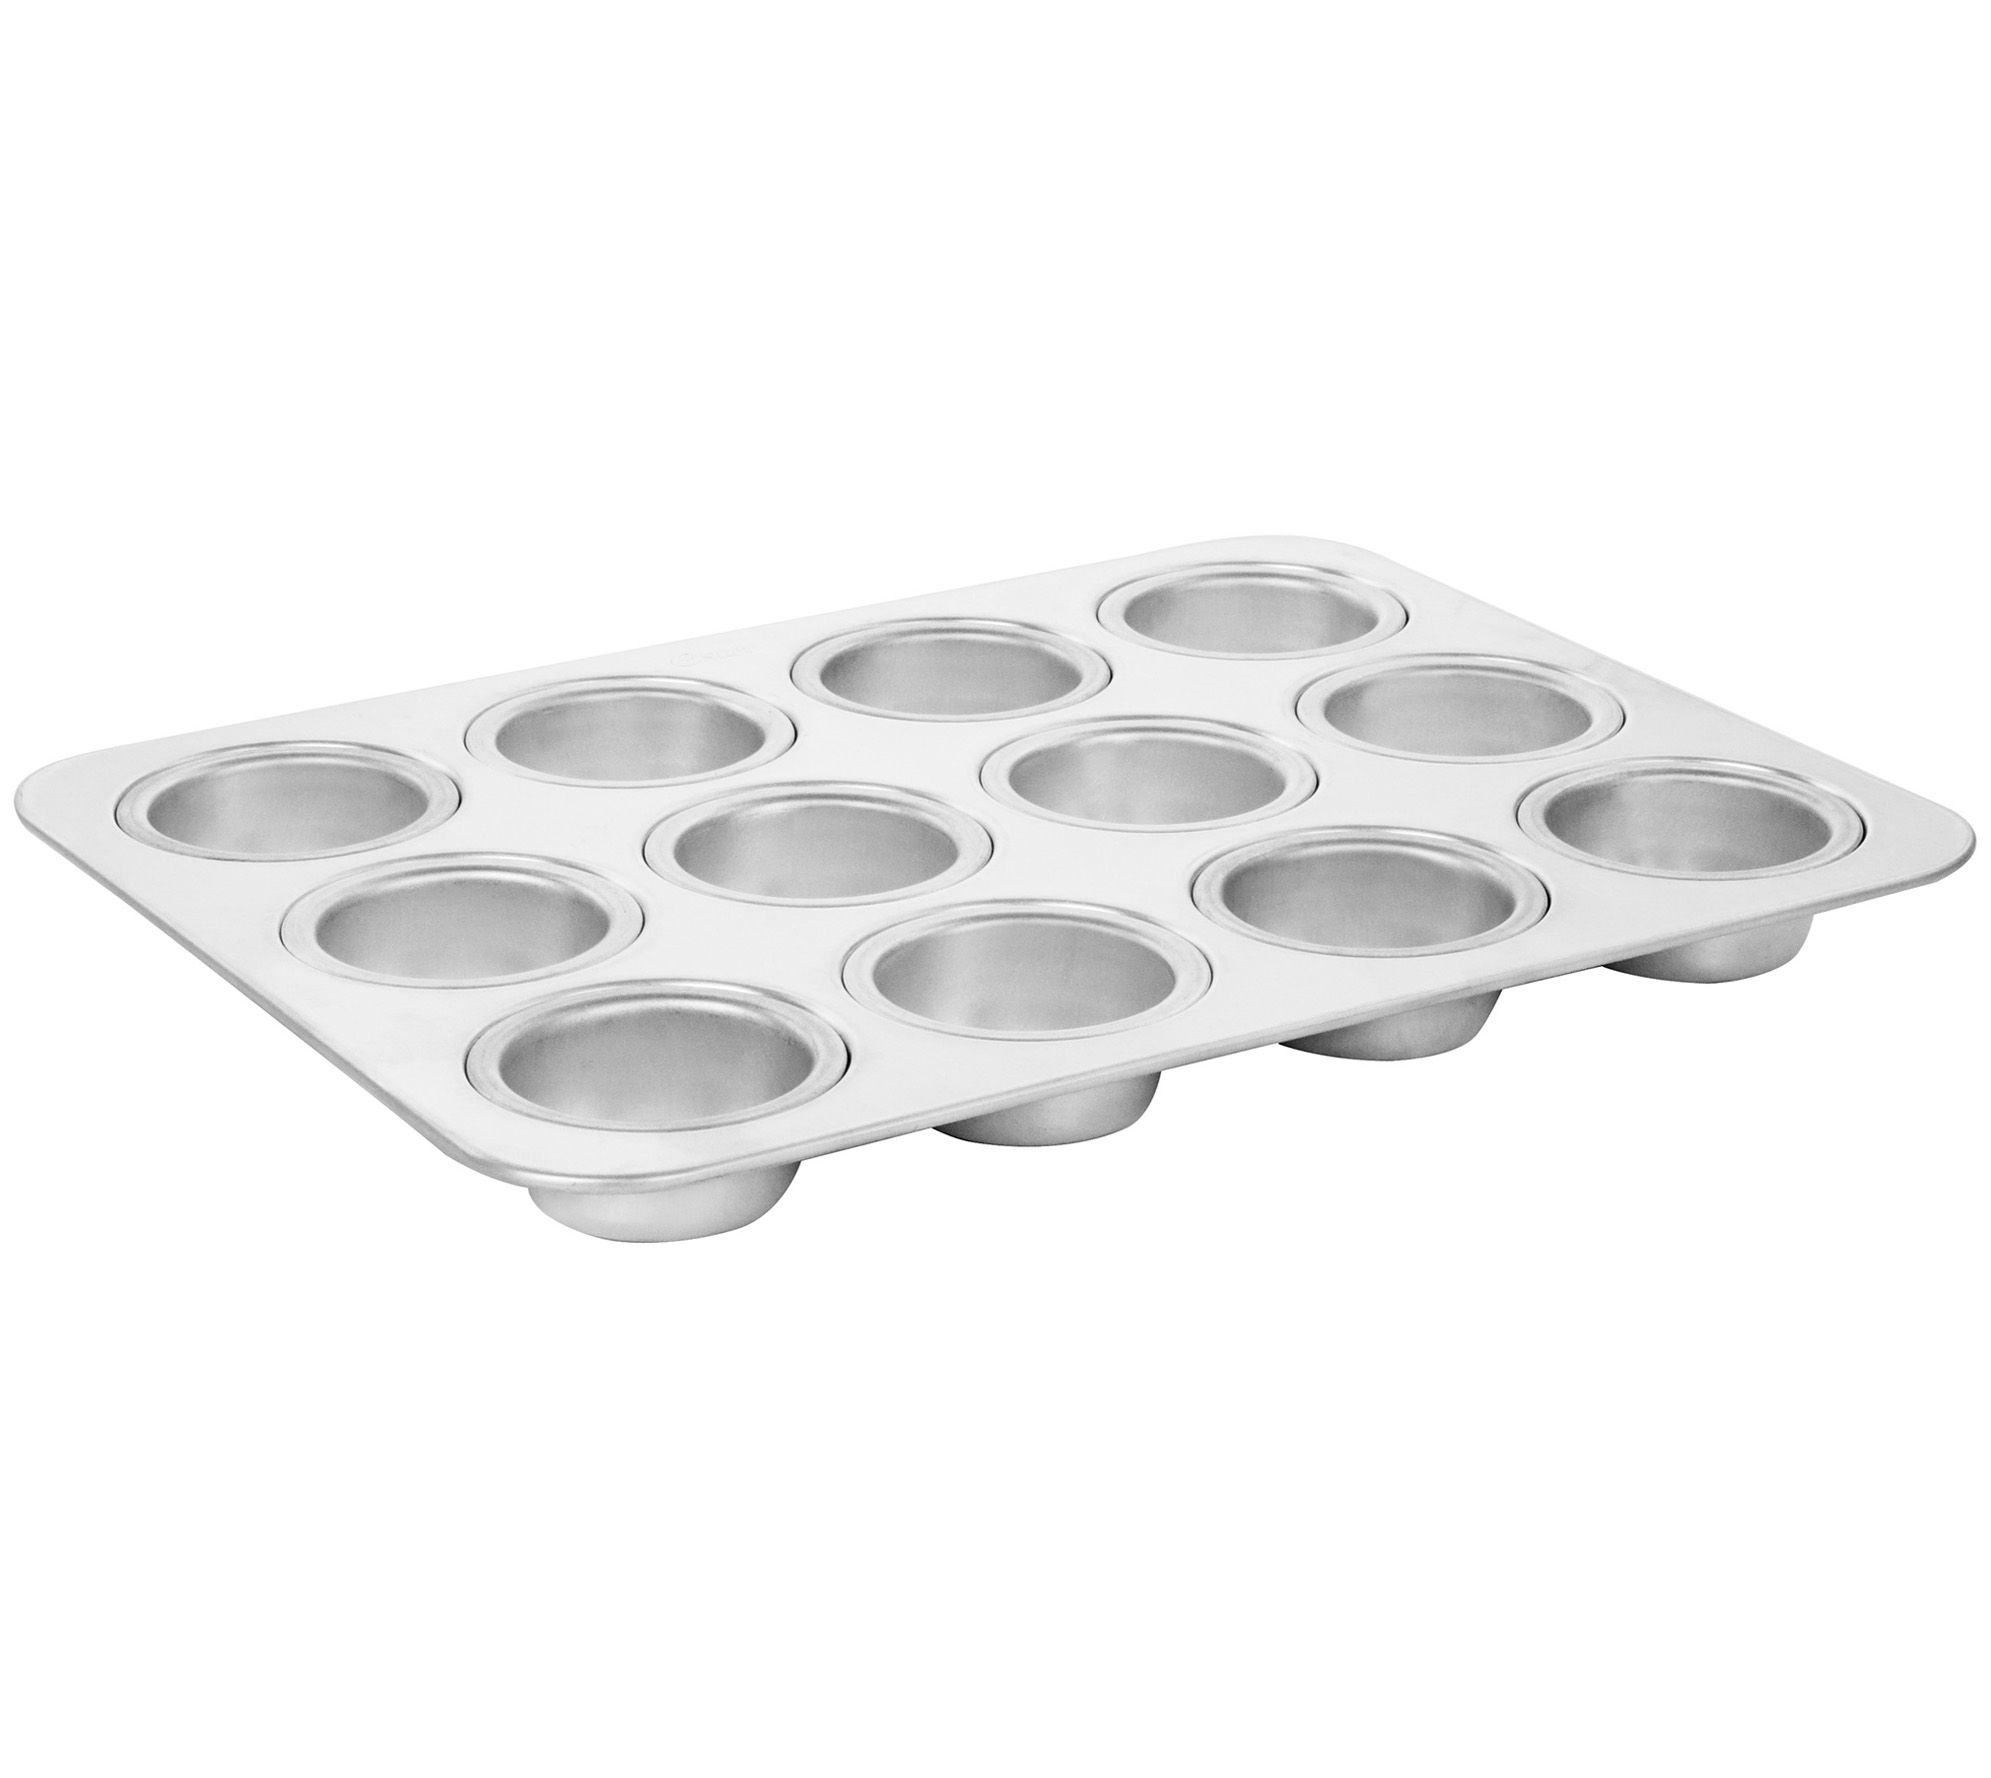 Farberware Bakeware Nonstick Fluted Mold, Cupcake, Muffin, And Cake Pan  Set, 4-Piece & Reviews